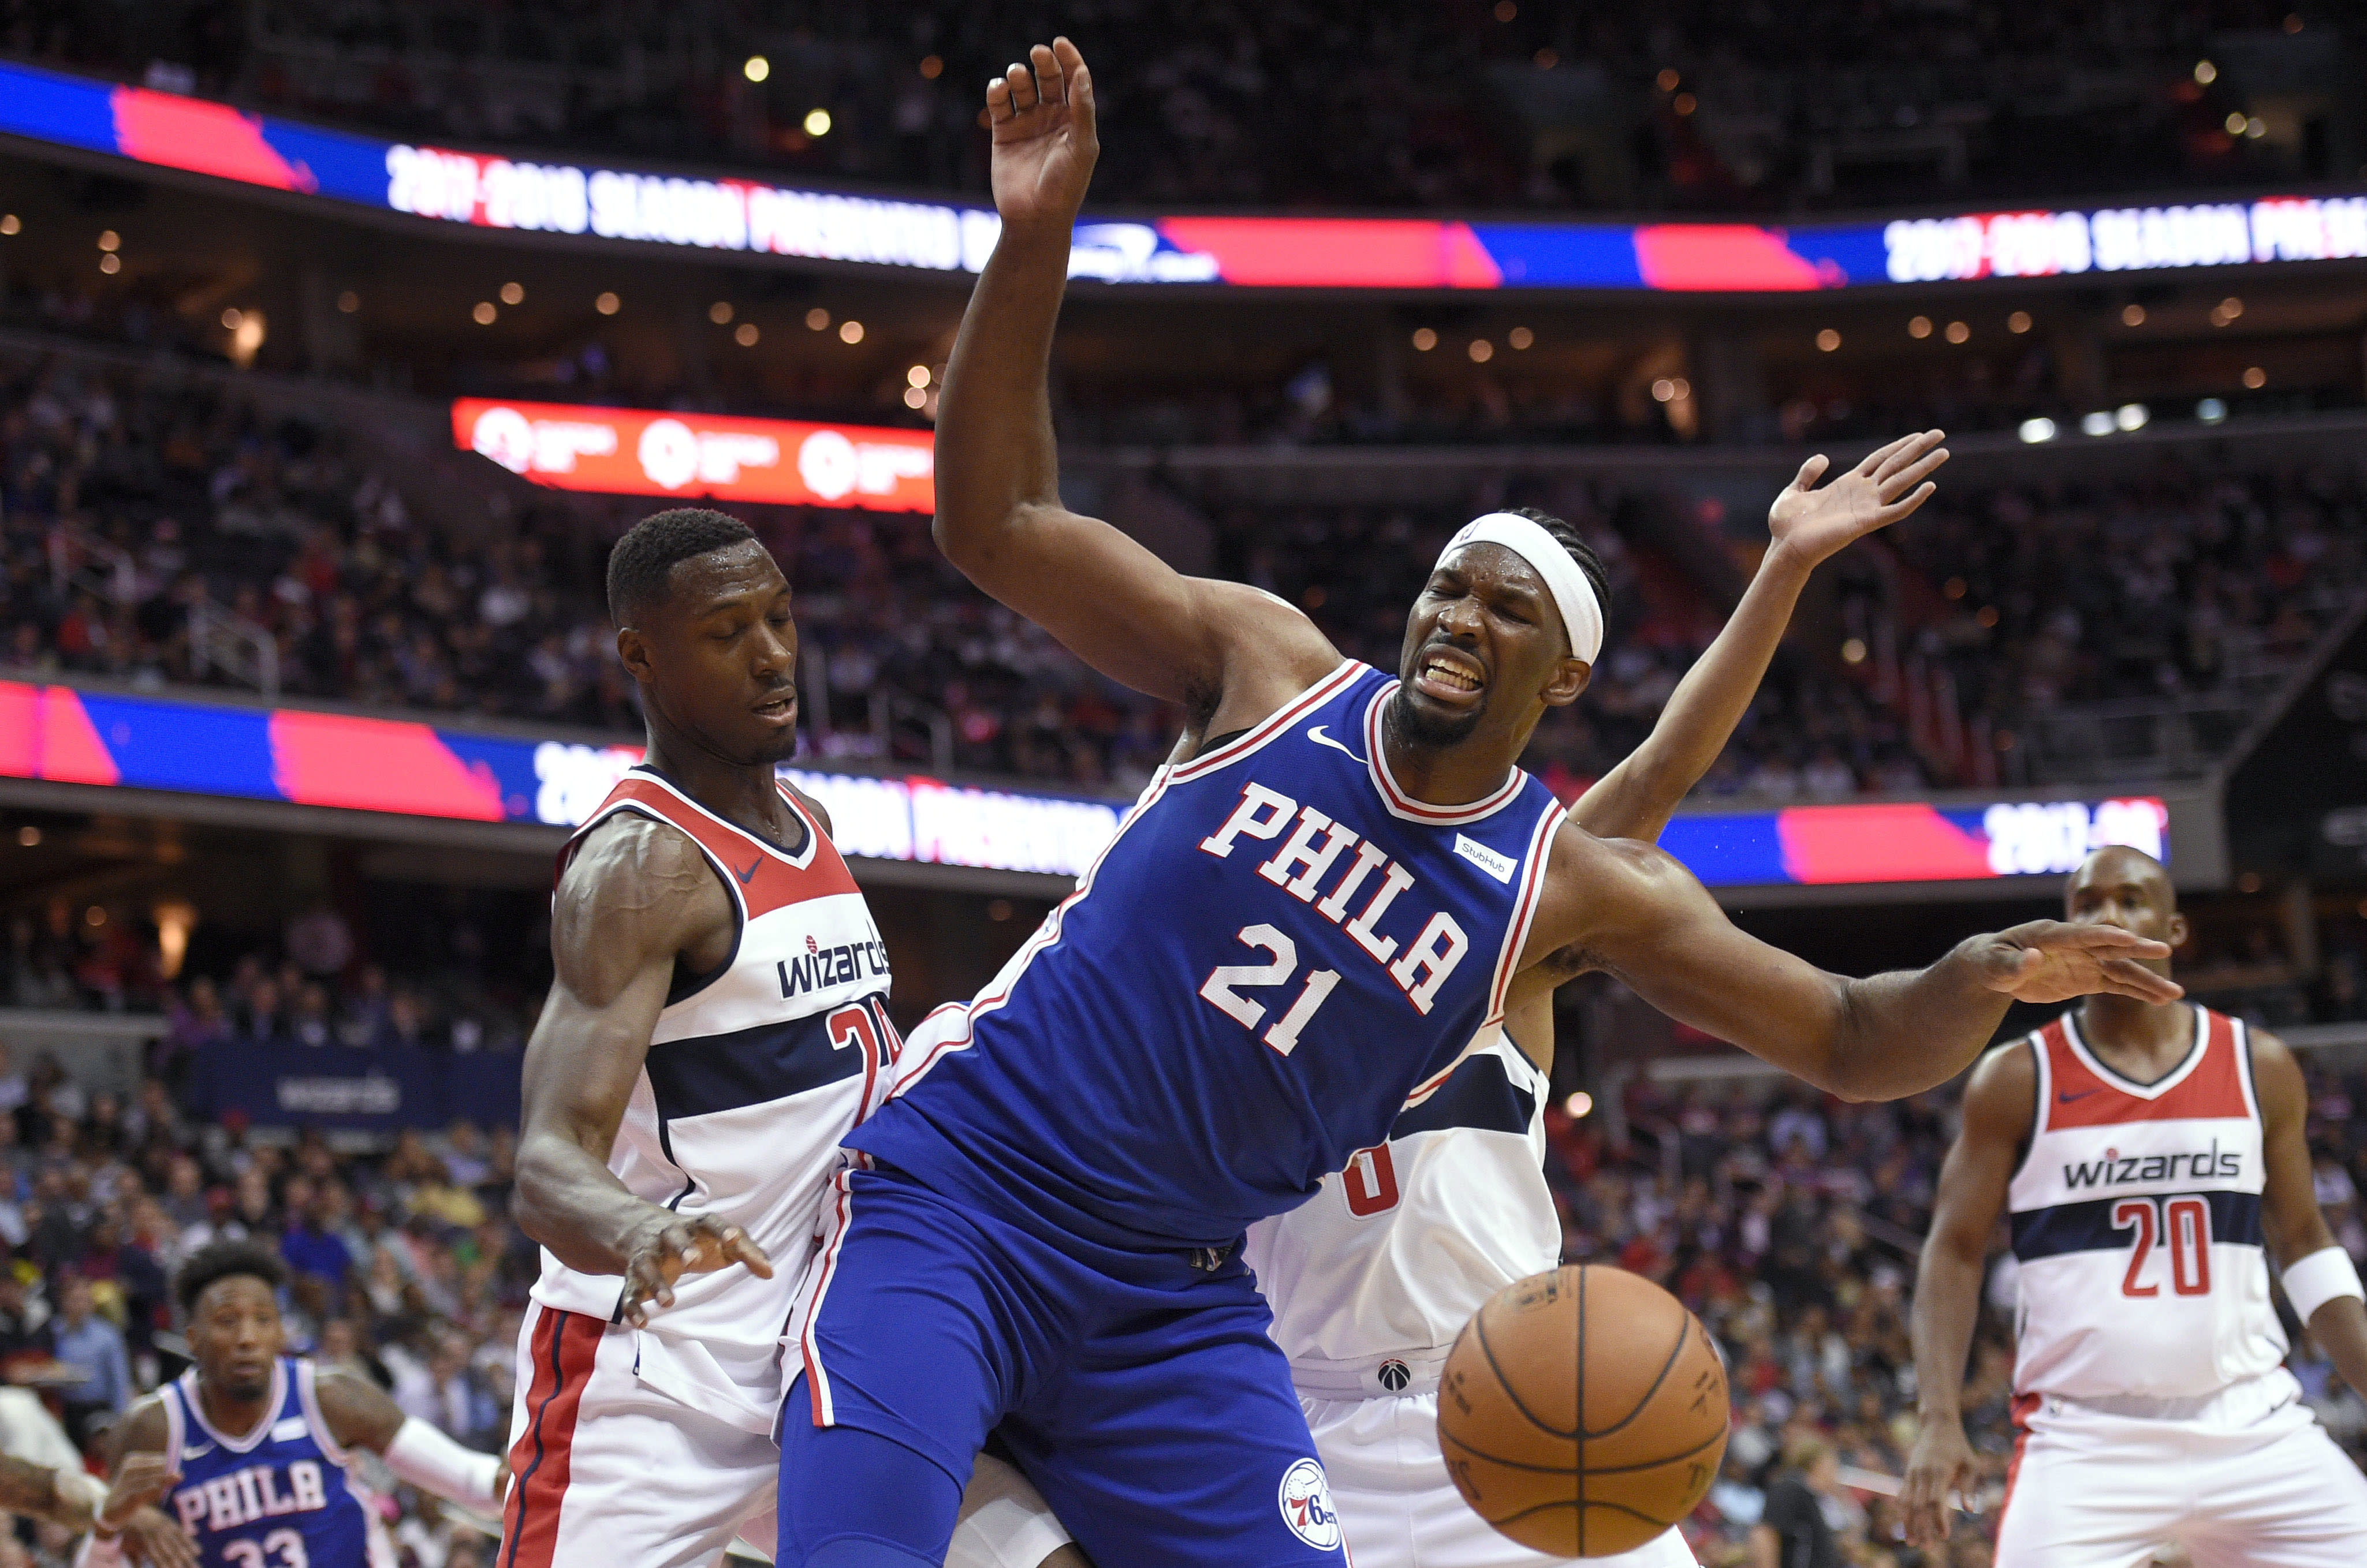 Fans shower 76ers with 'Trust the Process' chants in D.C.